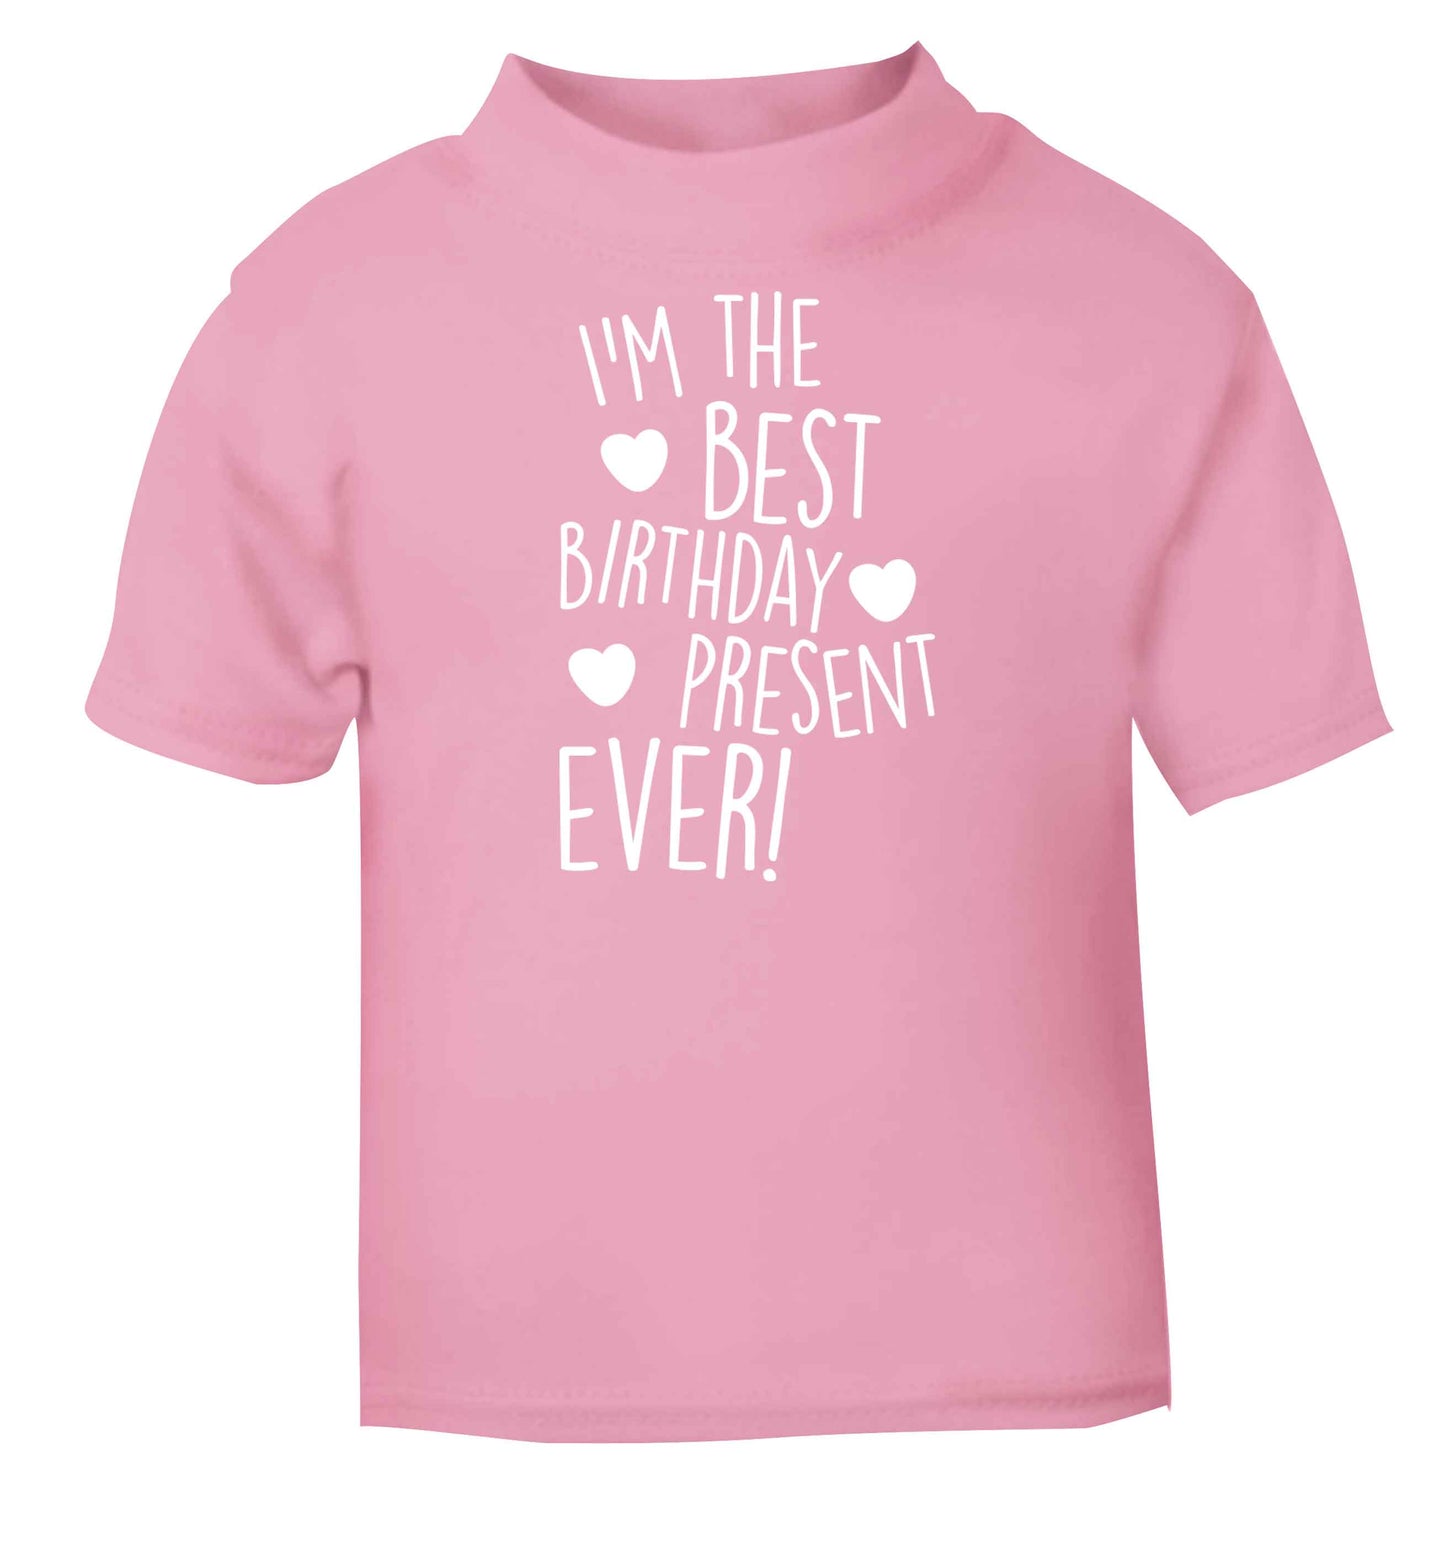 I'm the best birthday present ever light pink baby toddler Tshirt 2 Years